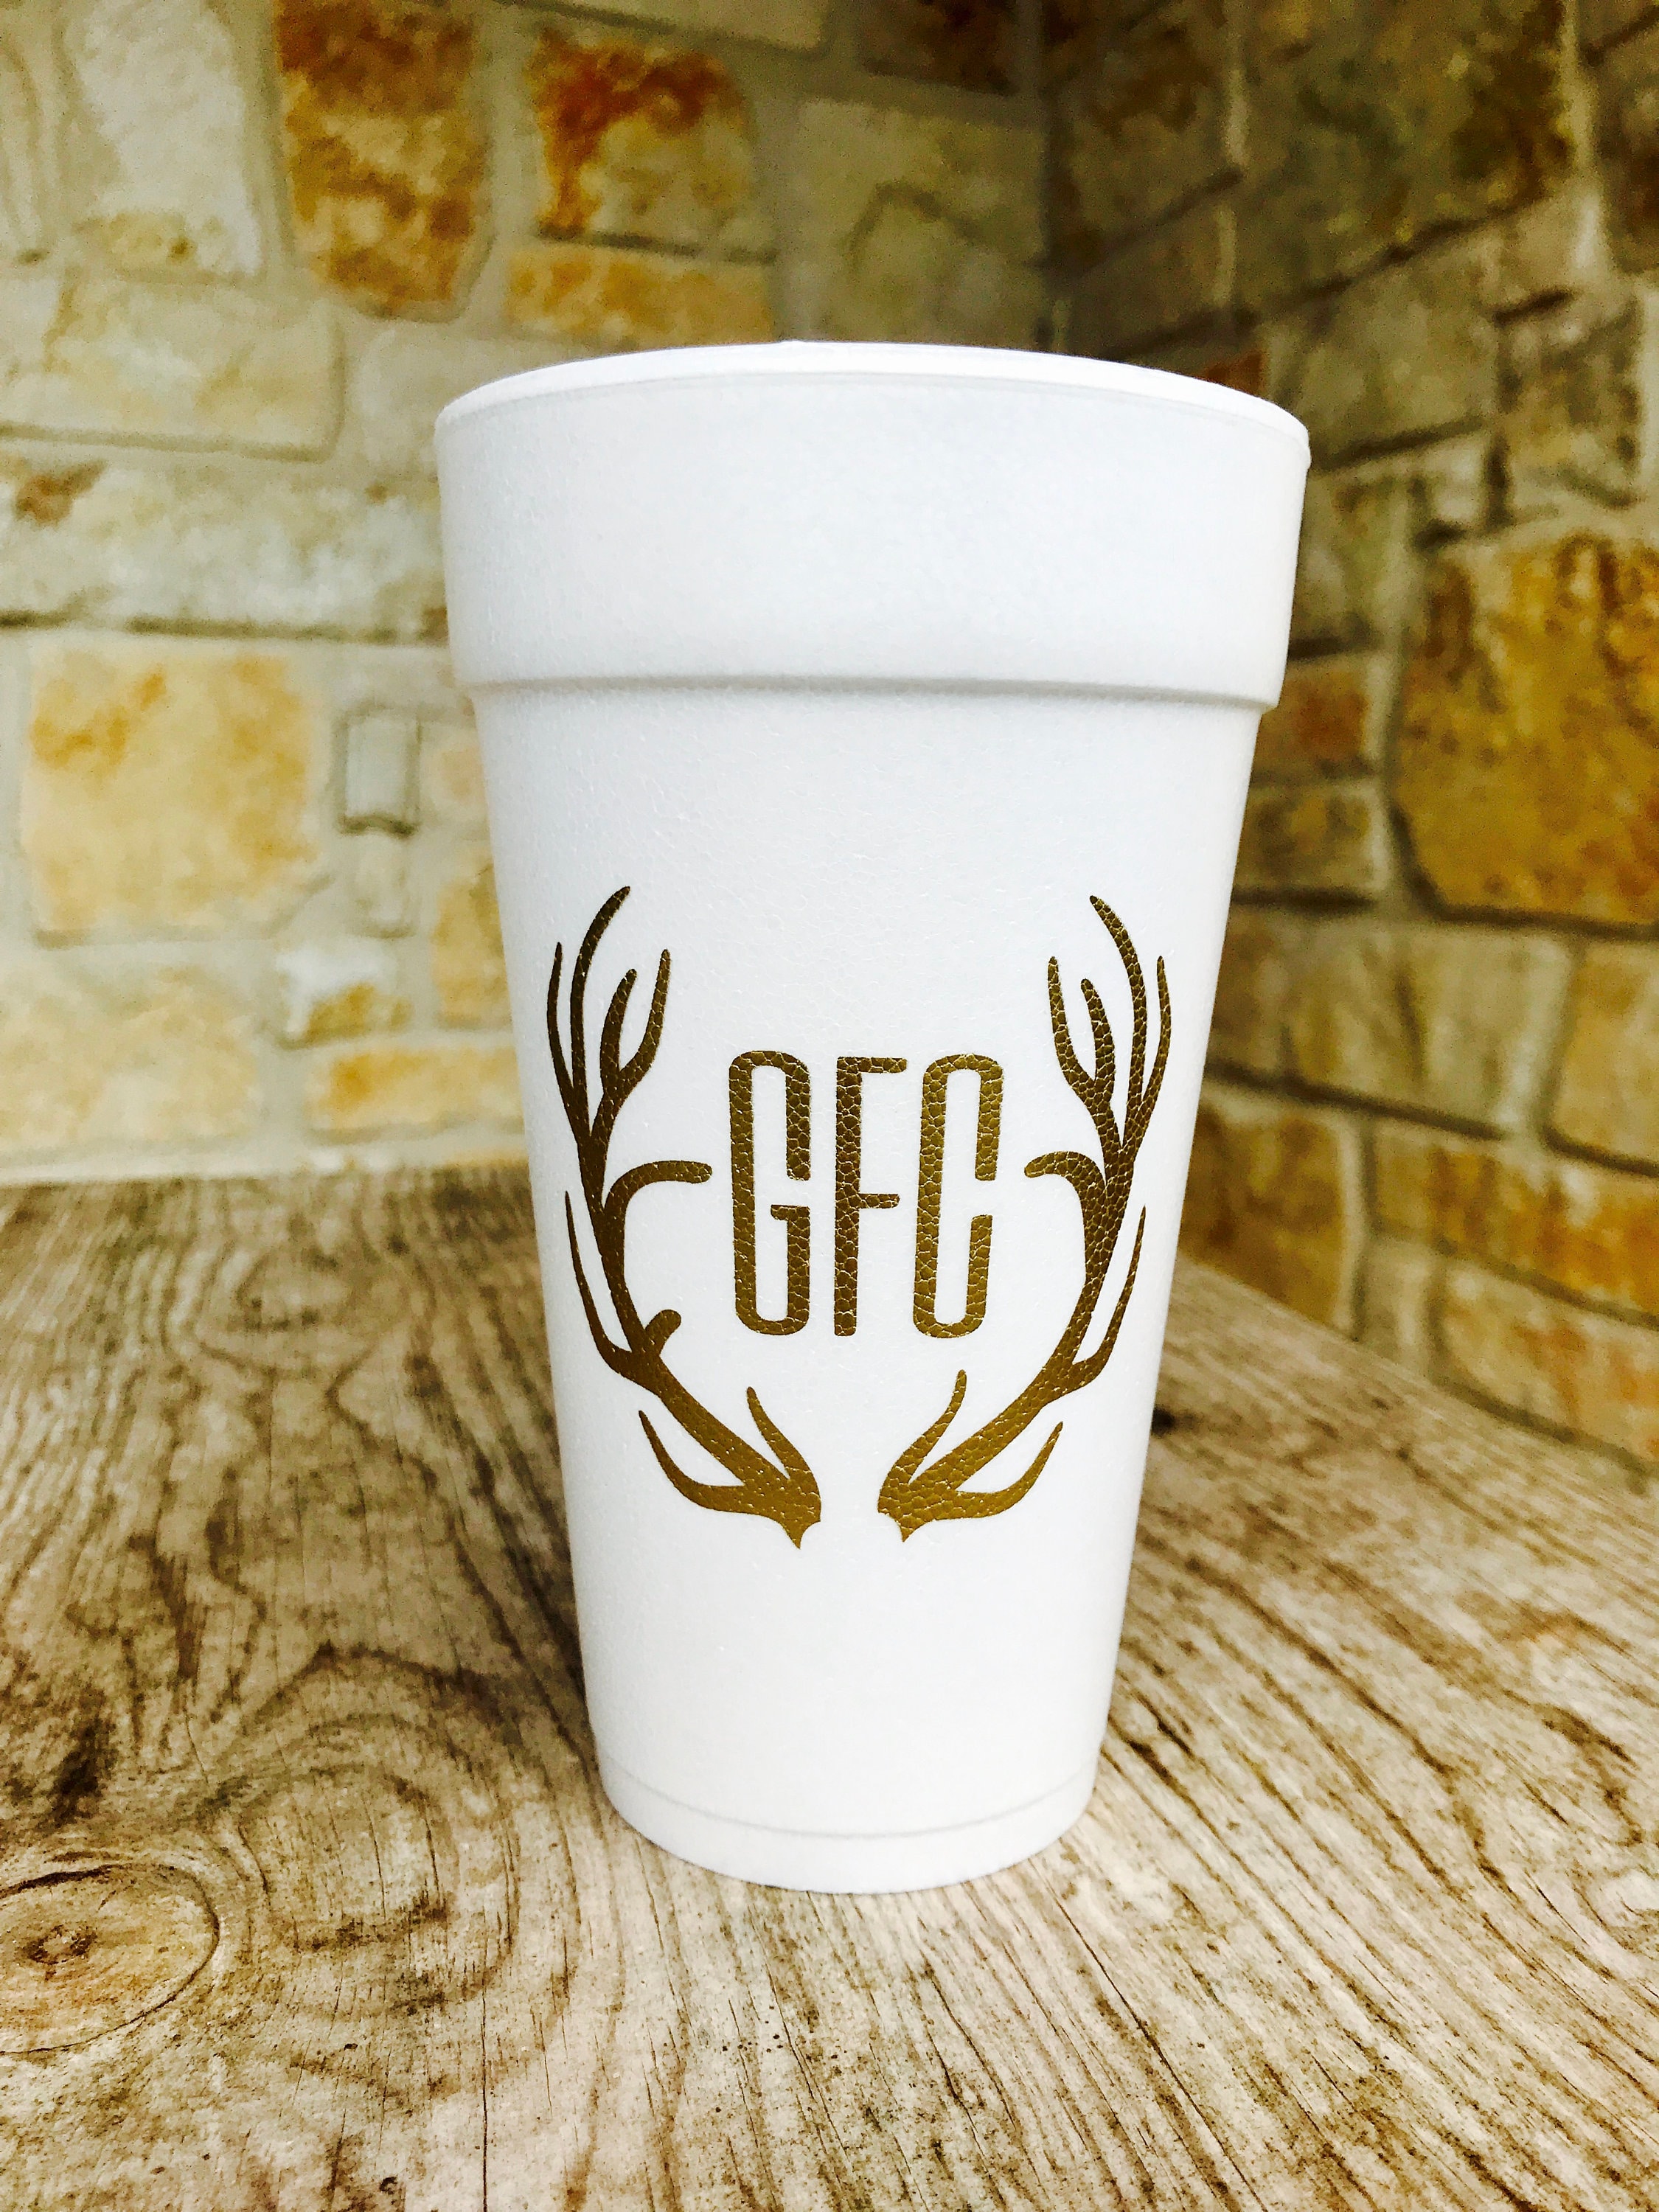 Empire 24 Oz Foam Cups with Lids, Insulated Styrofoam Disposable